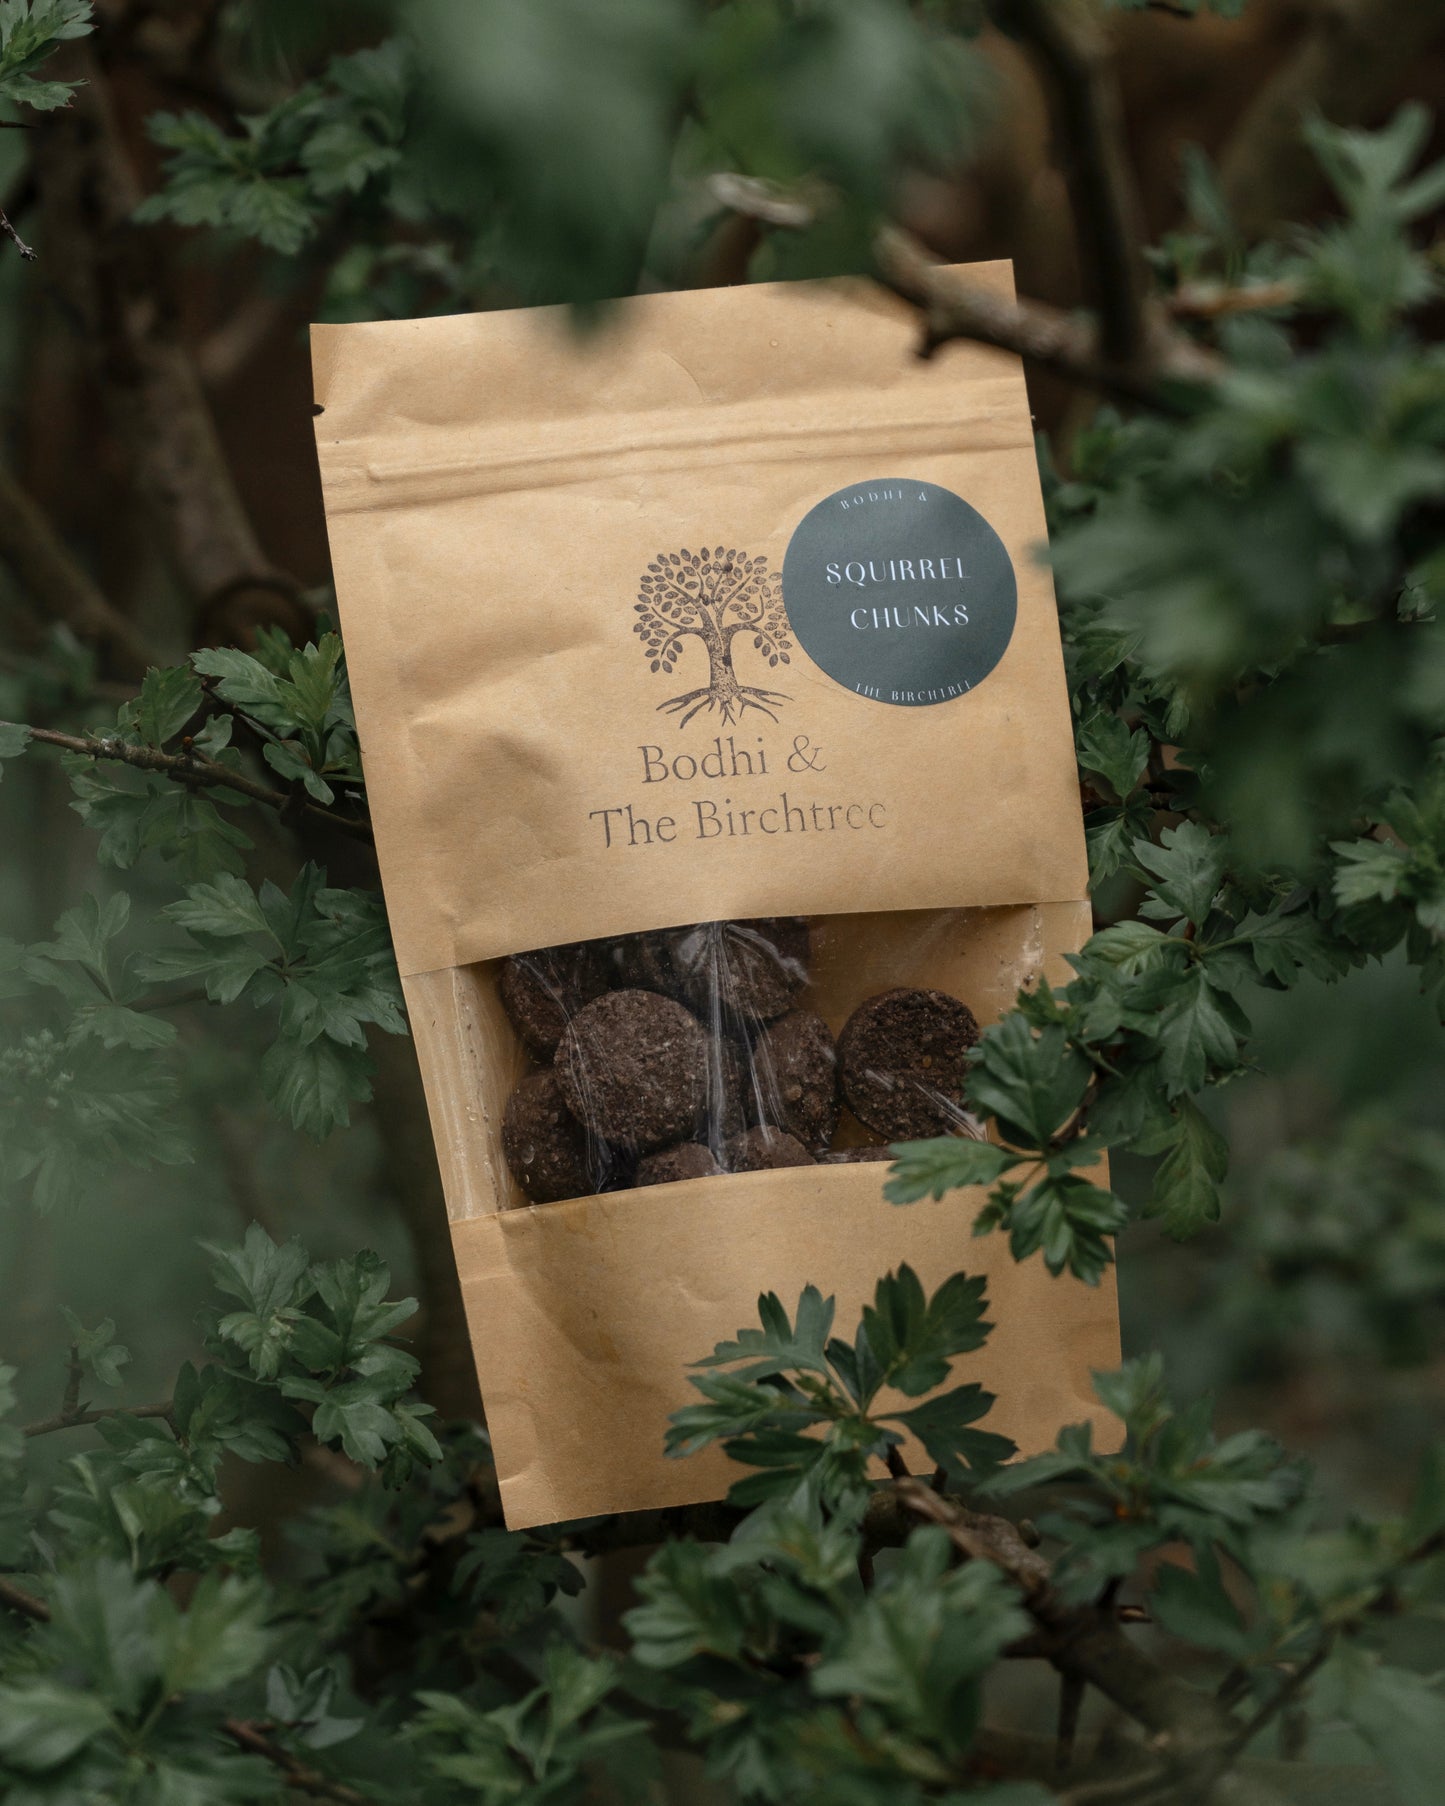 Bodhi & The Birchtree Squirrel Chunks 80g